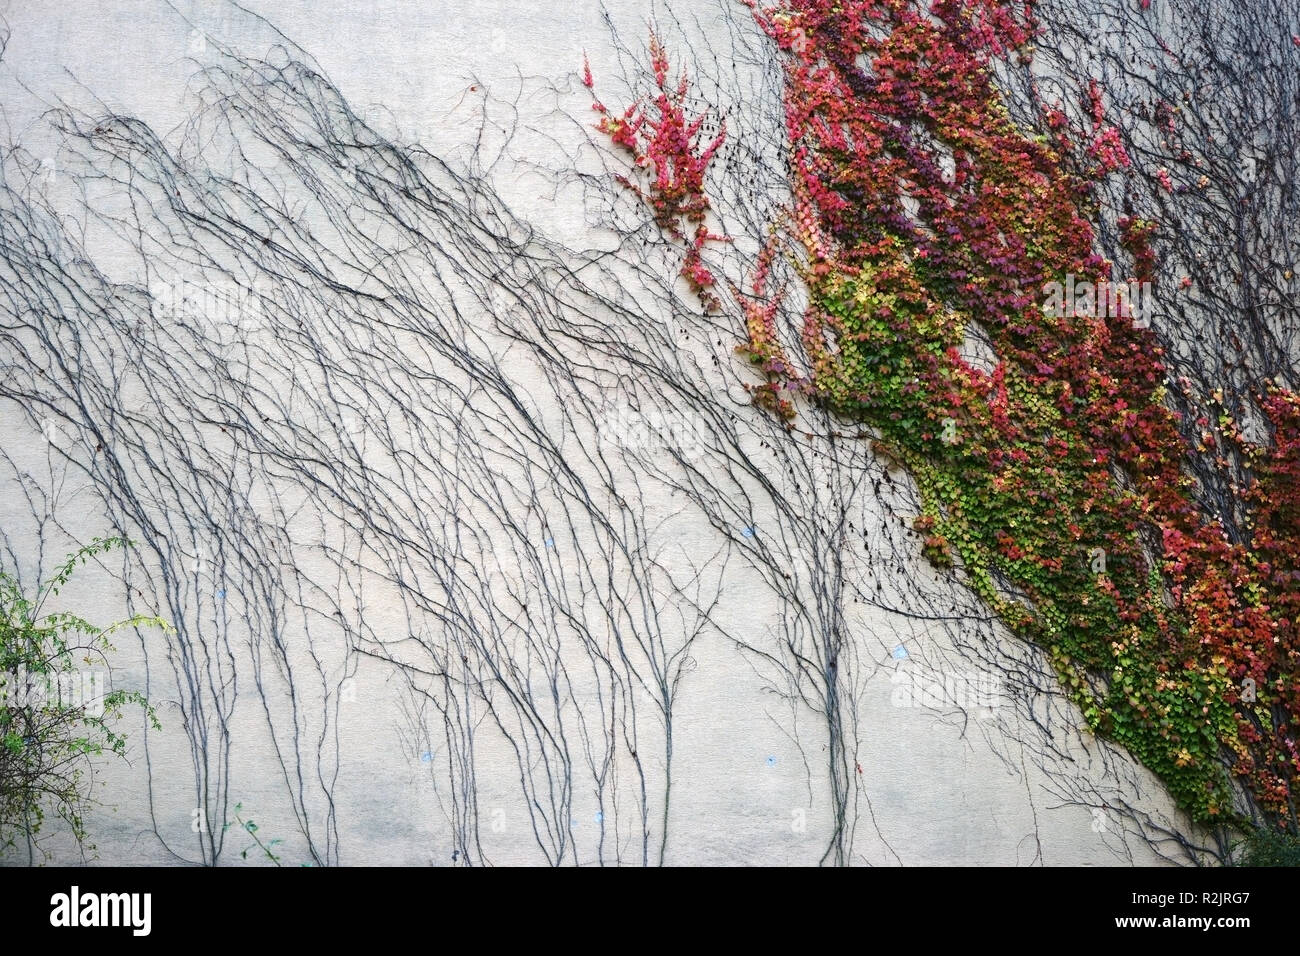 Tendrils and branches of a vine plant on a cracked wall with colorful autumn leaves, Stock Photo